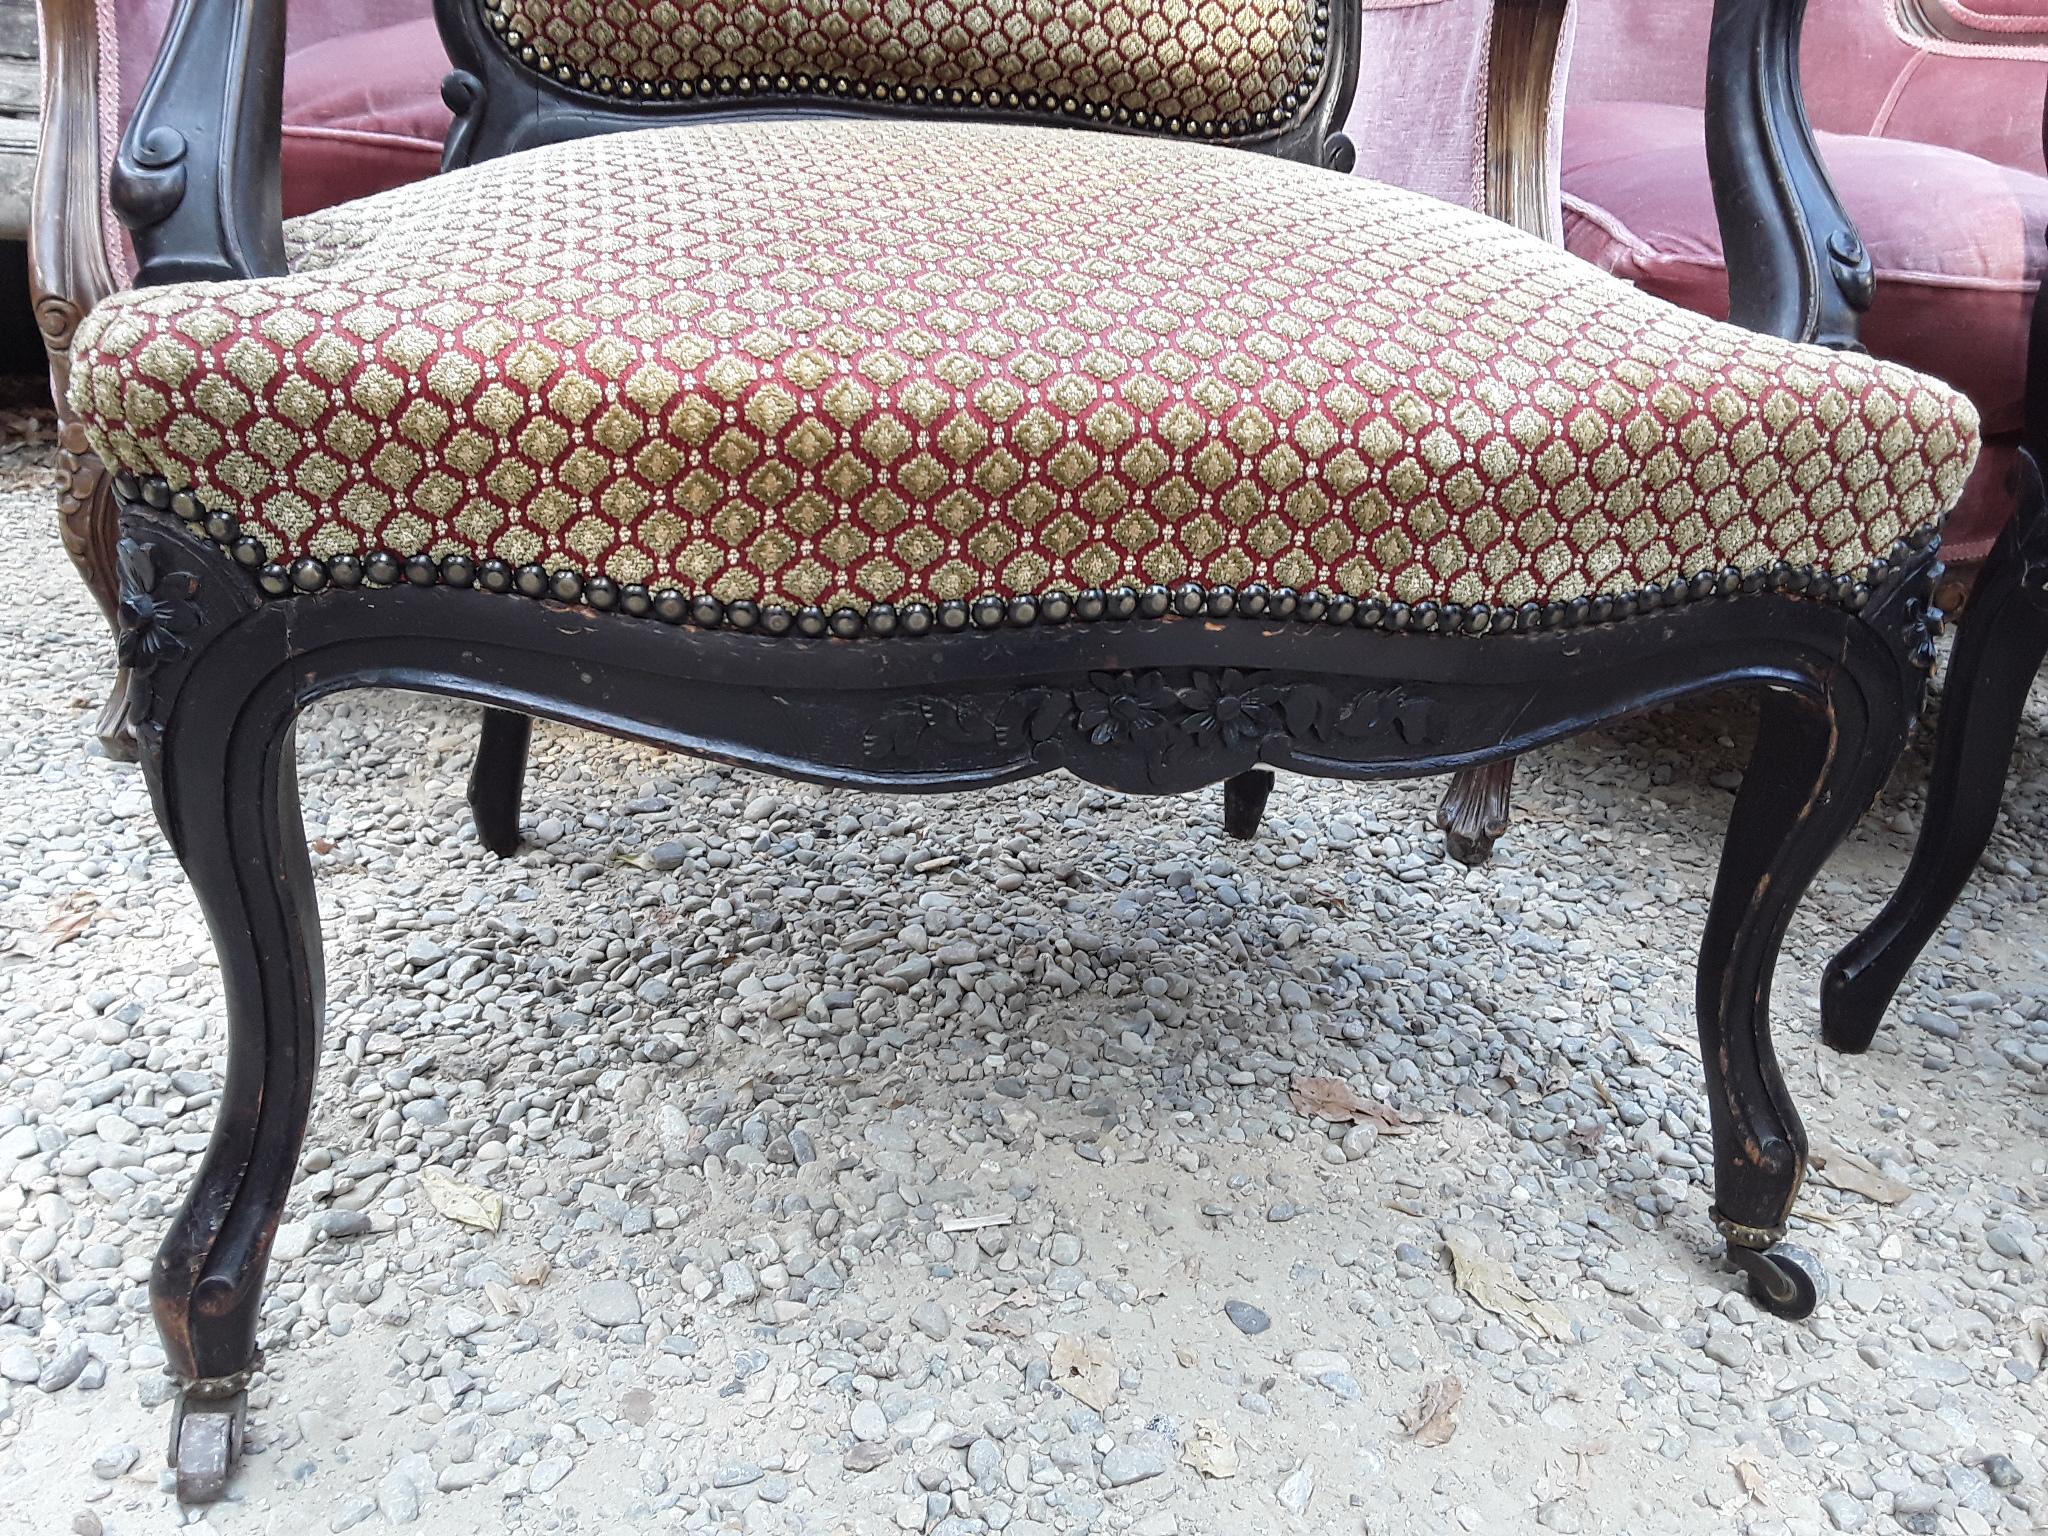 19th Century Pair of Italian Ebonized Wood Armchairs with Original Fabric, 1890s For Sale 7